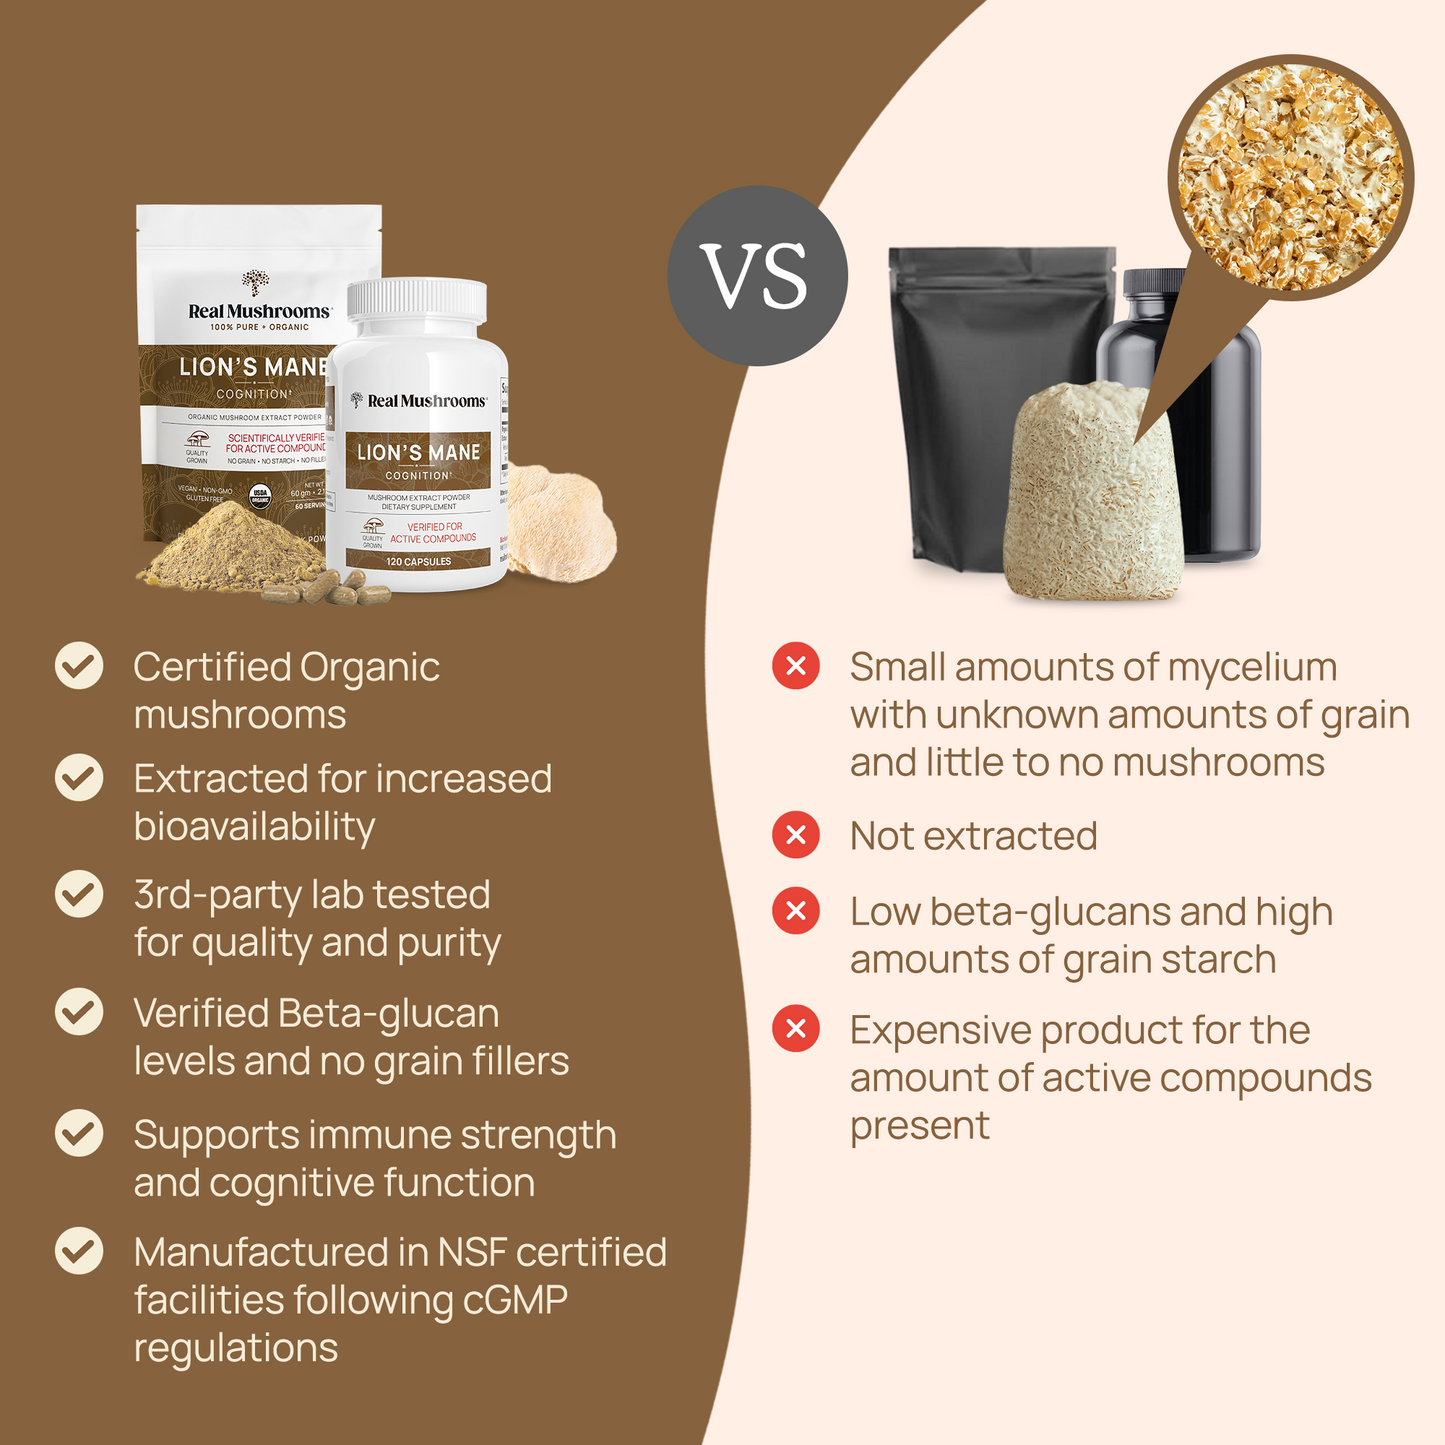 Comparison image between Real Mushrooms' Lion's Mane Mushroom Powder supplements and generic mushroom powder, highlighting the certified organic, quality-tested advantages of Real Mushrooms' Lions Mane versus the unknowns in generic powder.